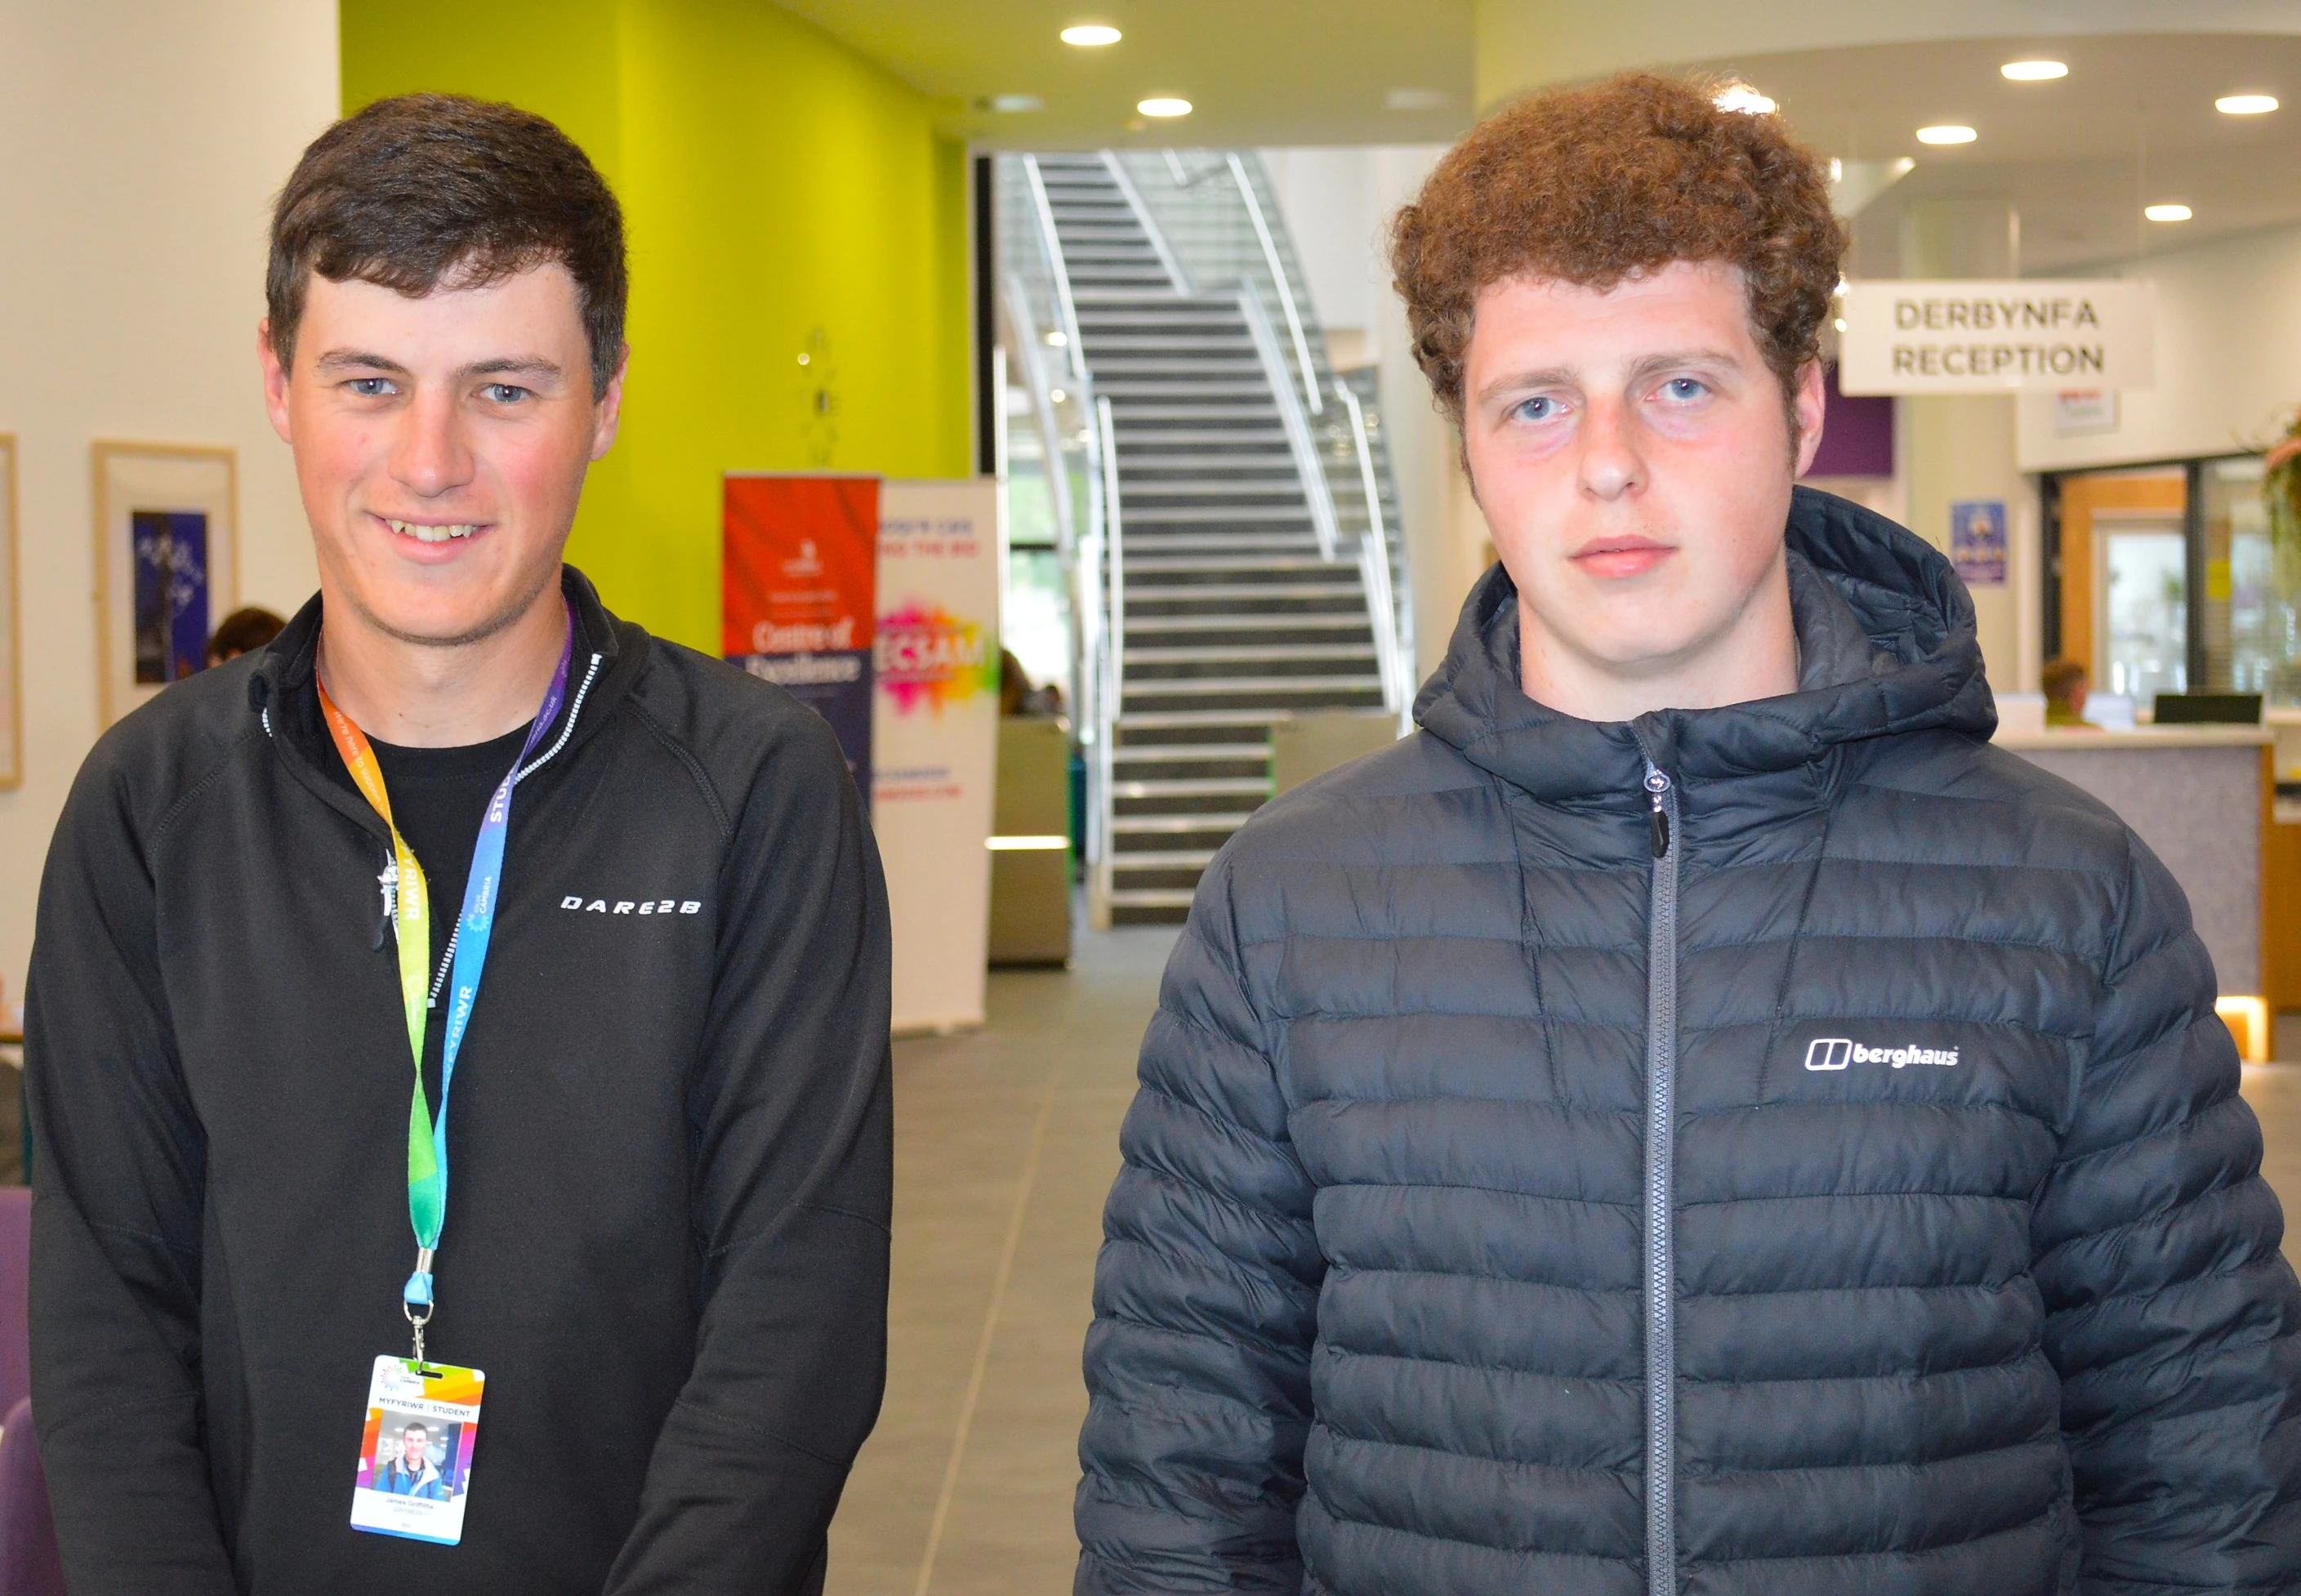 Jack Morgan, 20, and 23 year-old James Griffiths started their FE journey with Coleg Cambria Yale in Wrexham on the UK Government’s Kickstart programme.